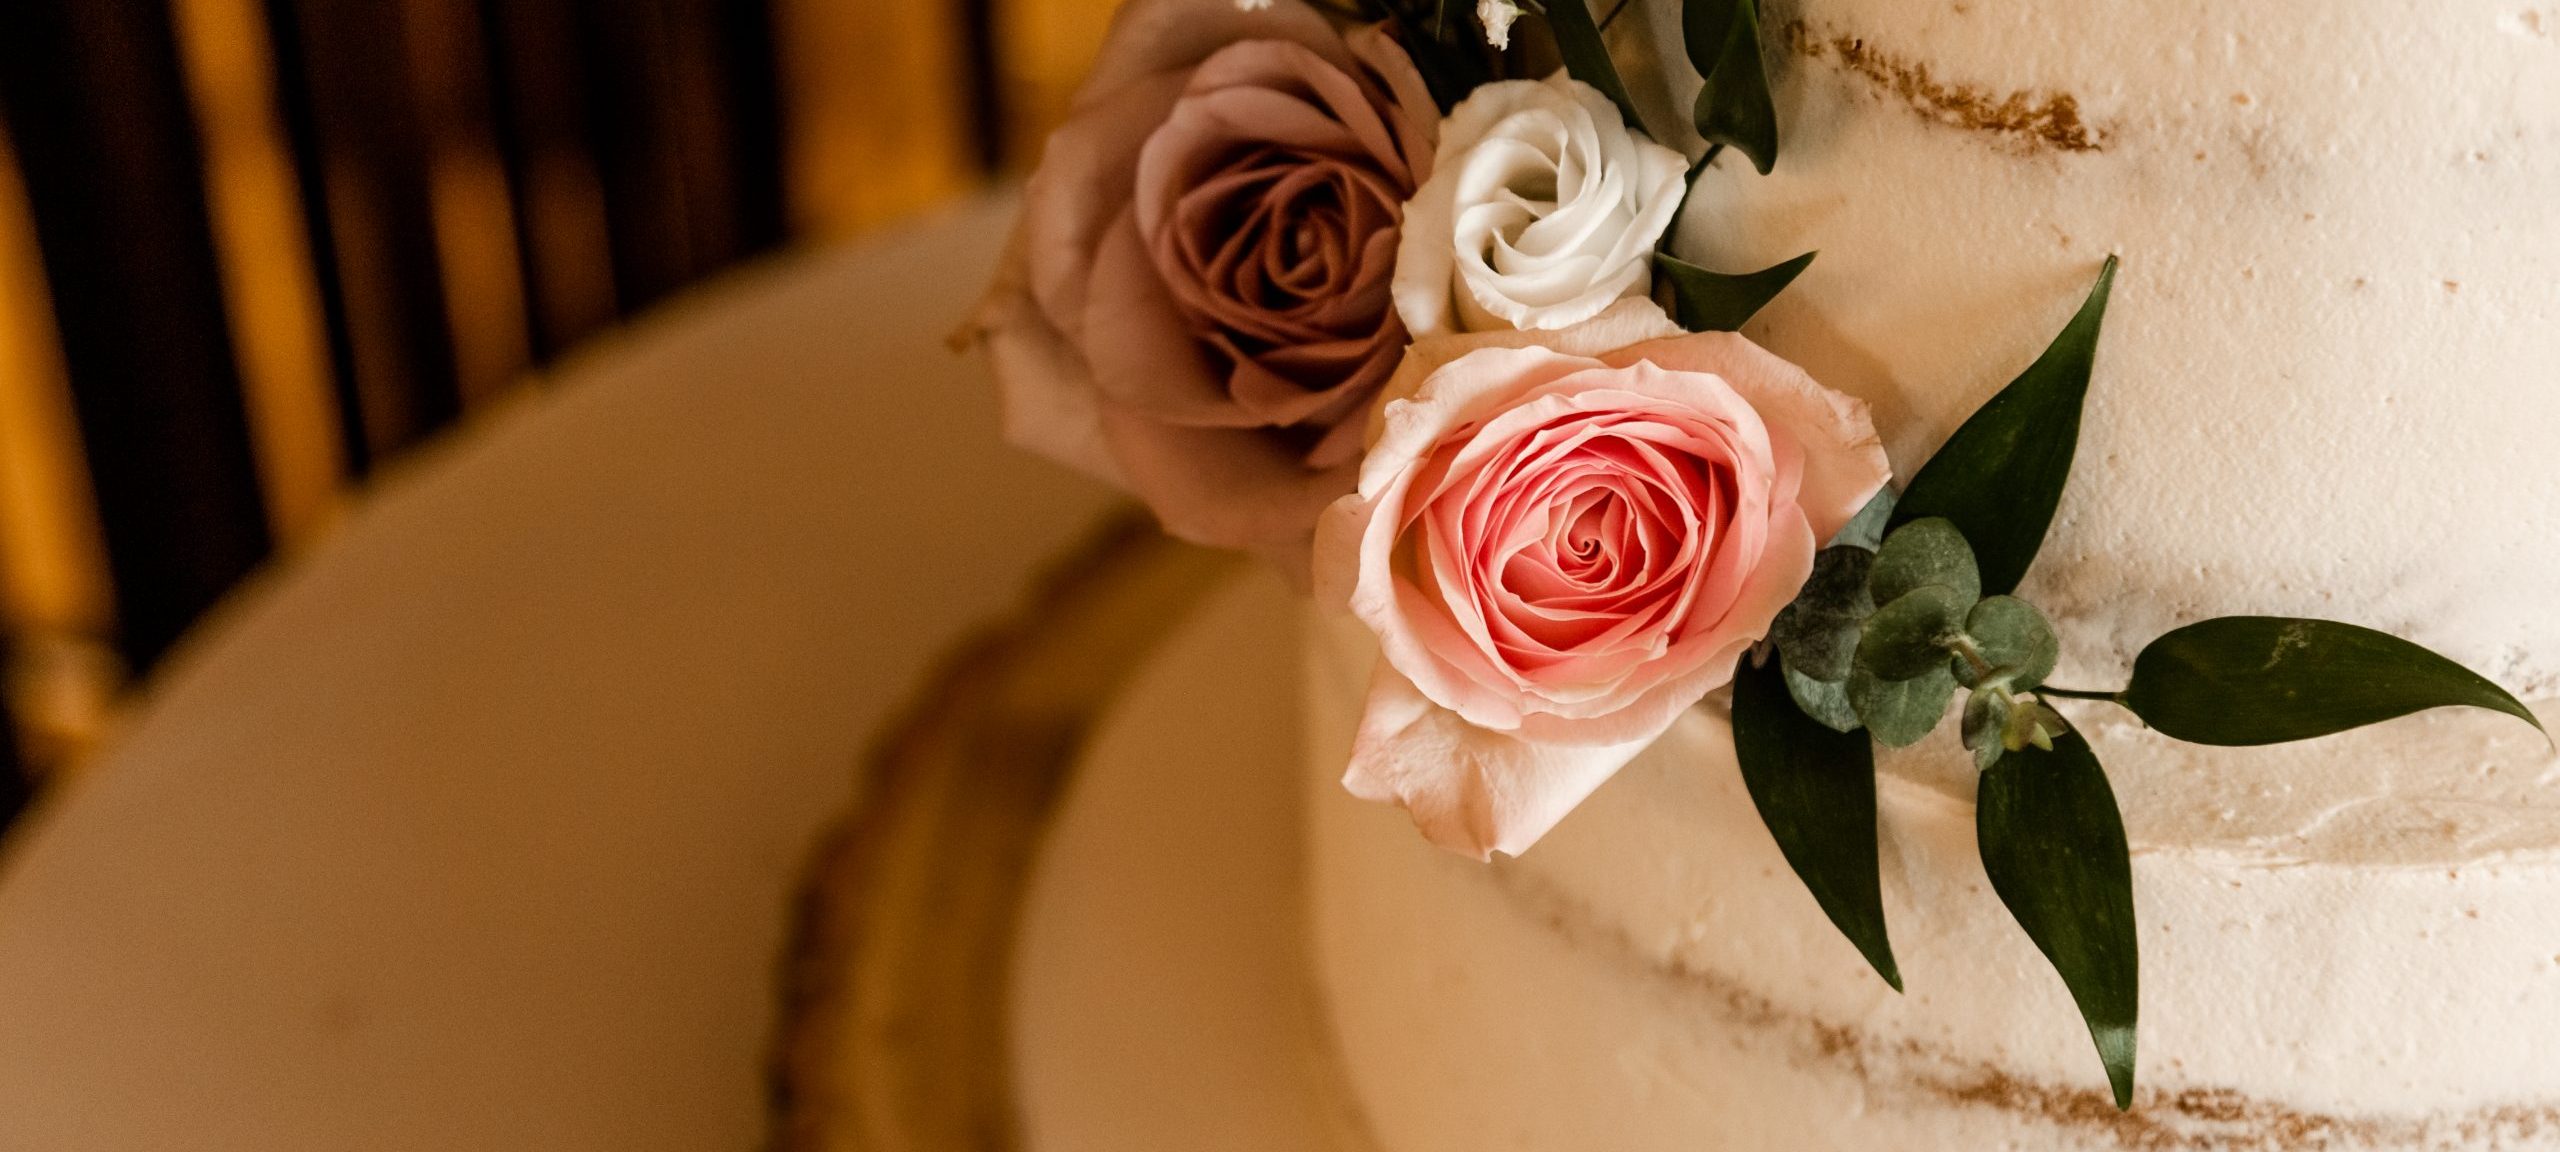 Close up of roses on a wedding cake